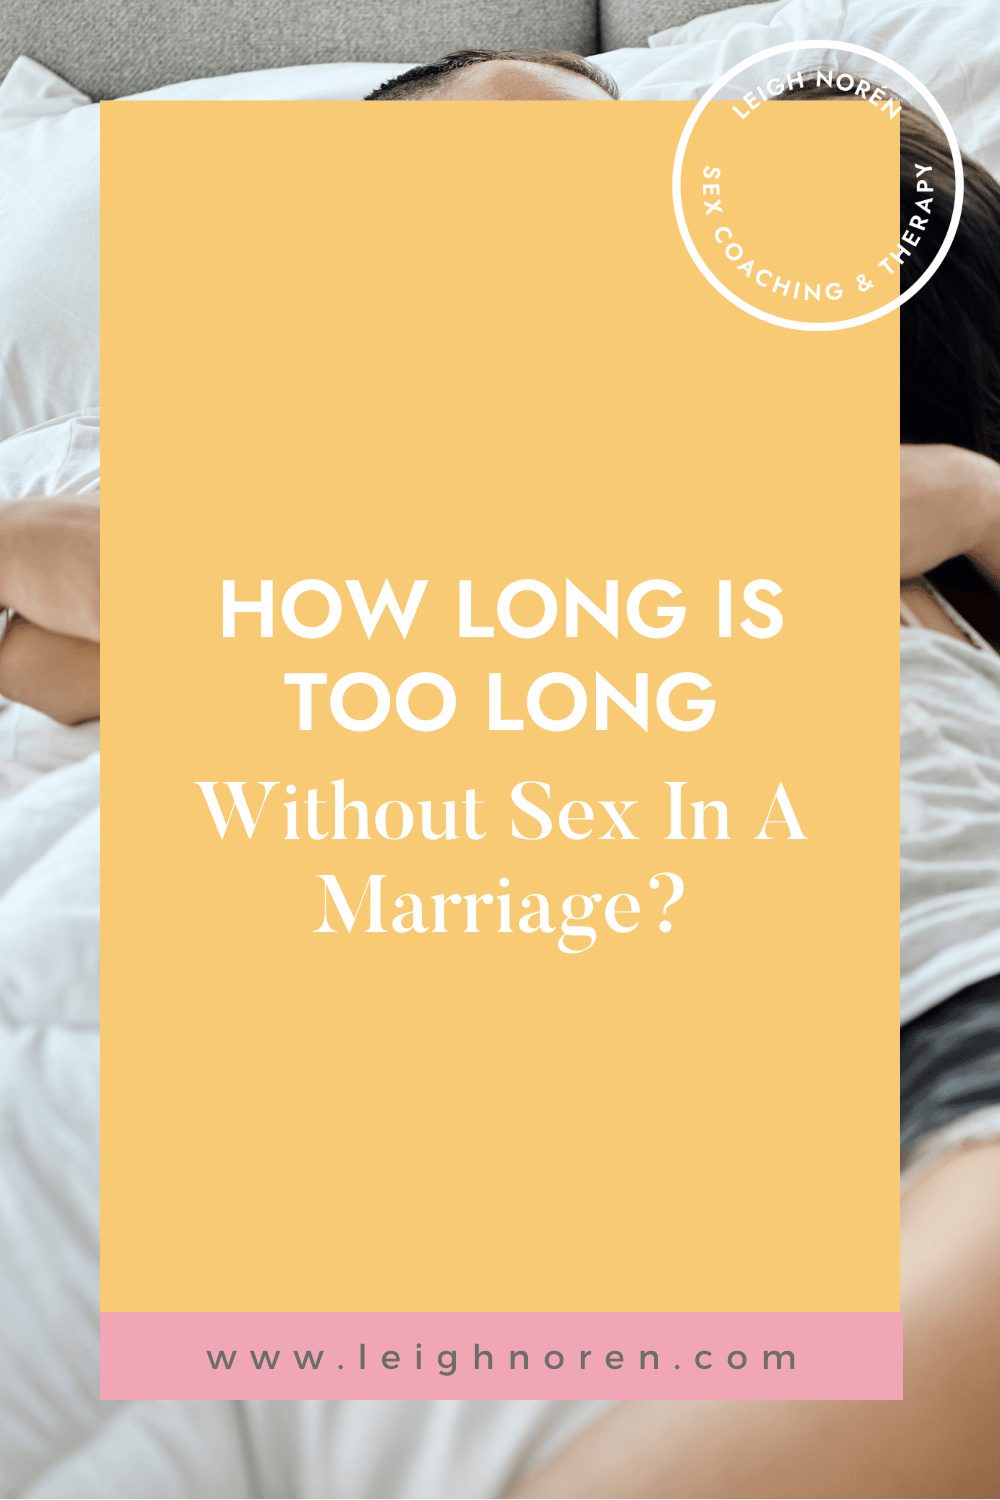 How Long Is Too Long Without Sex In A Marriage?